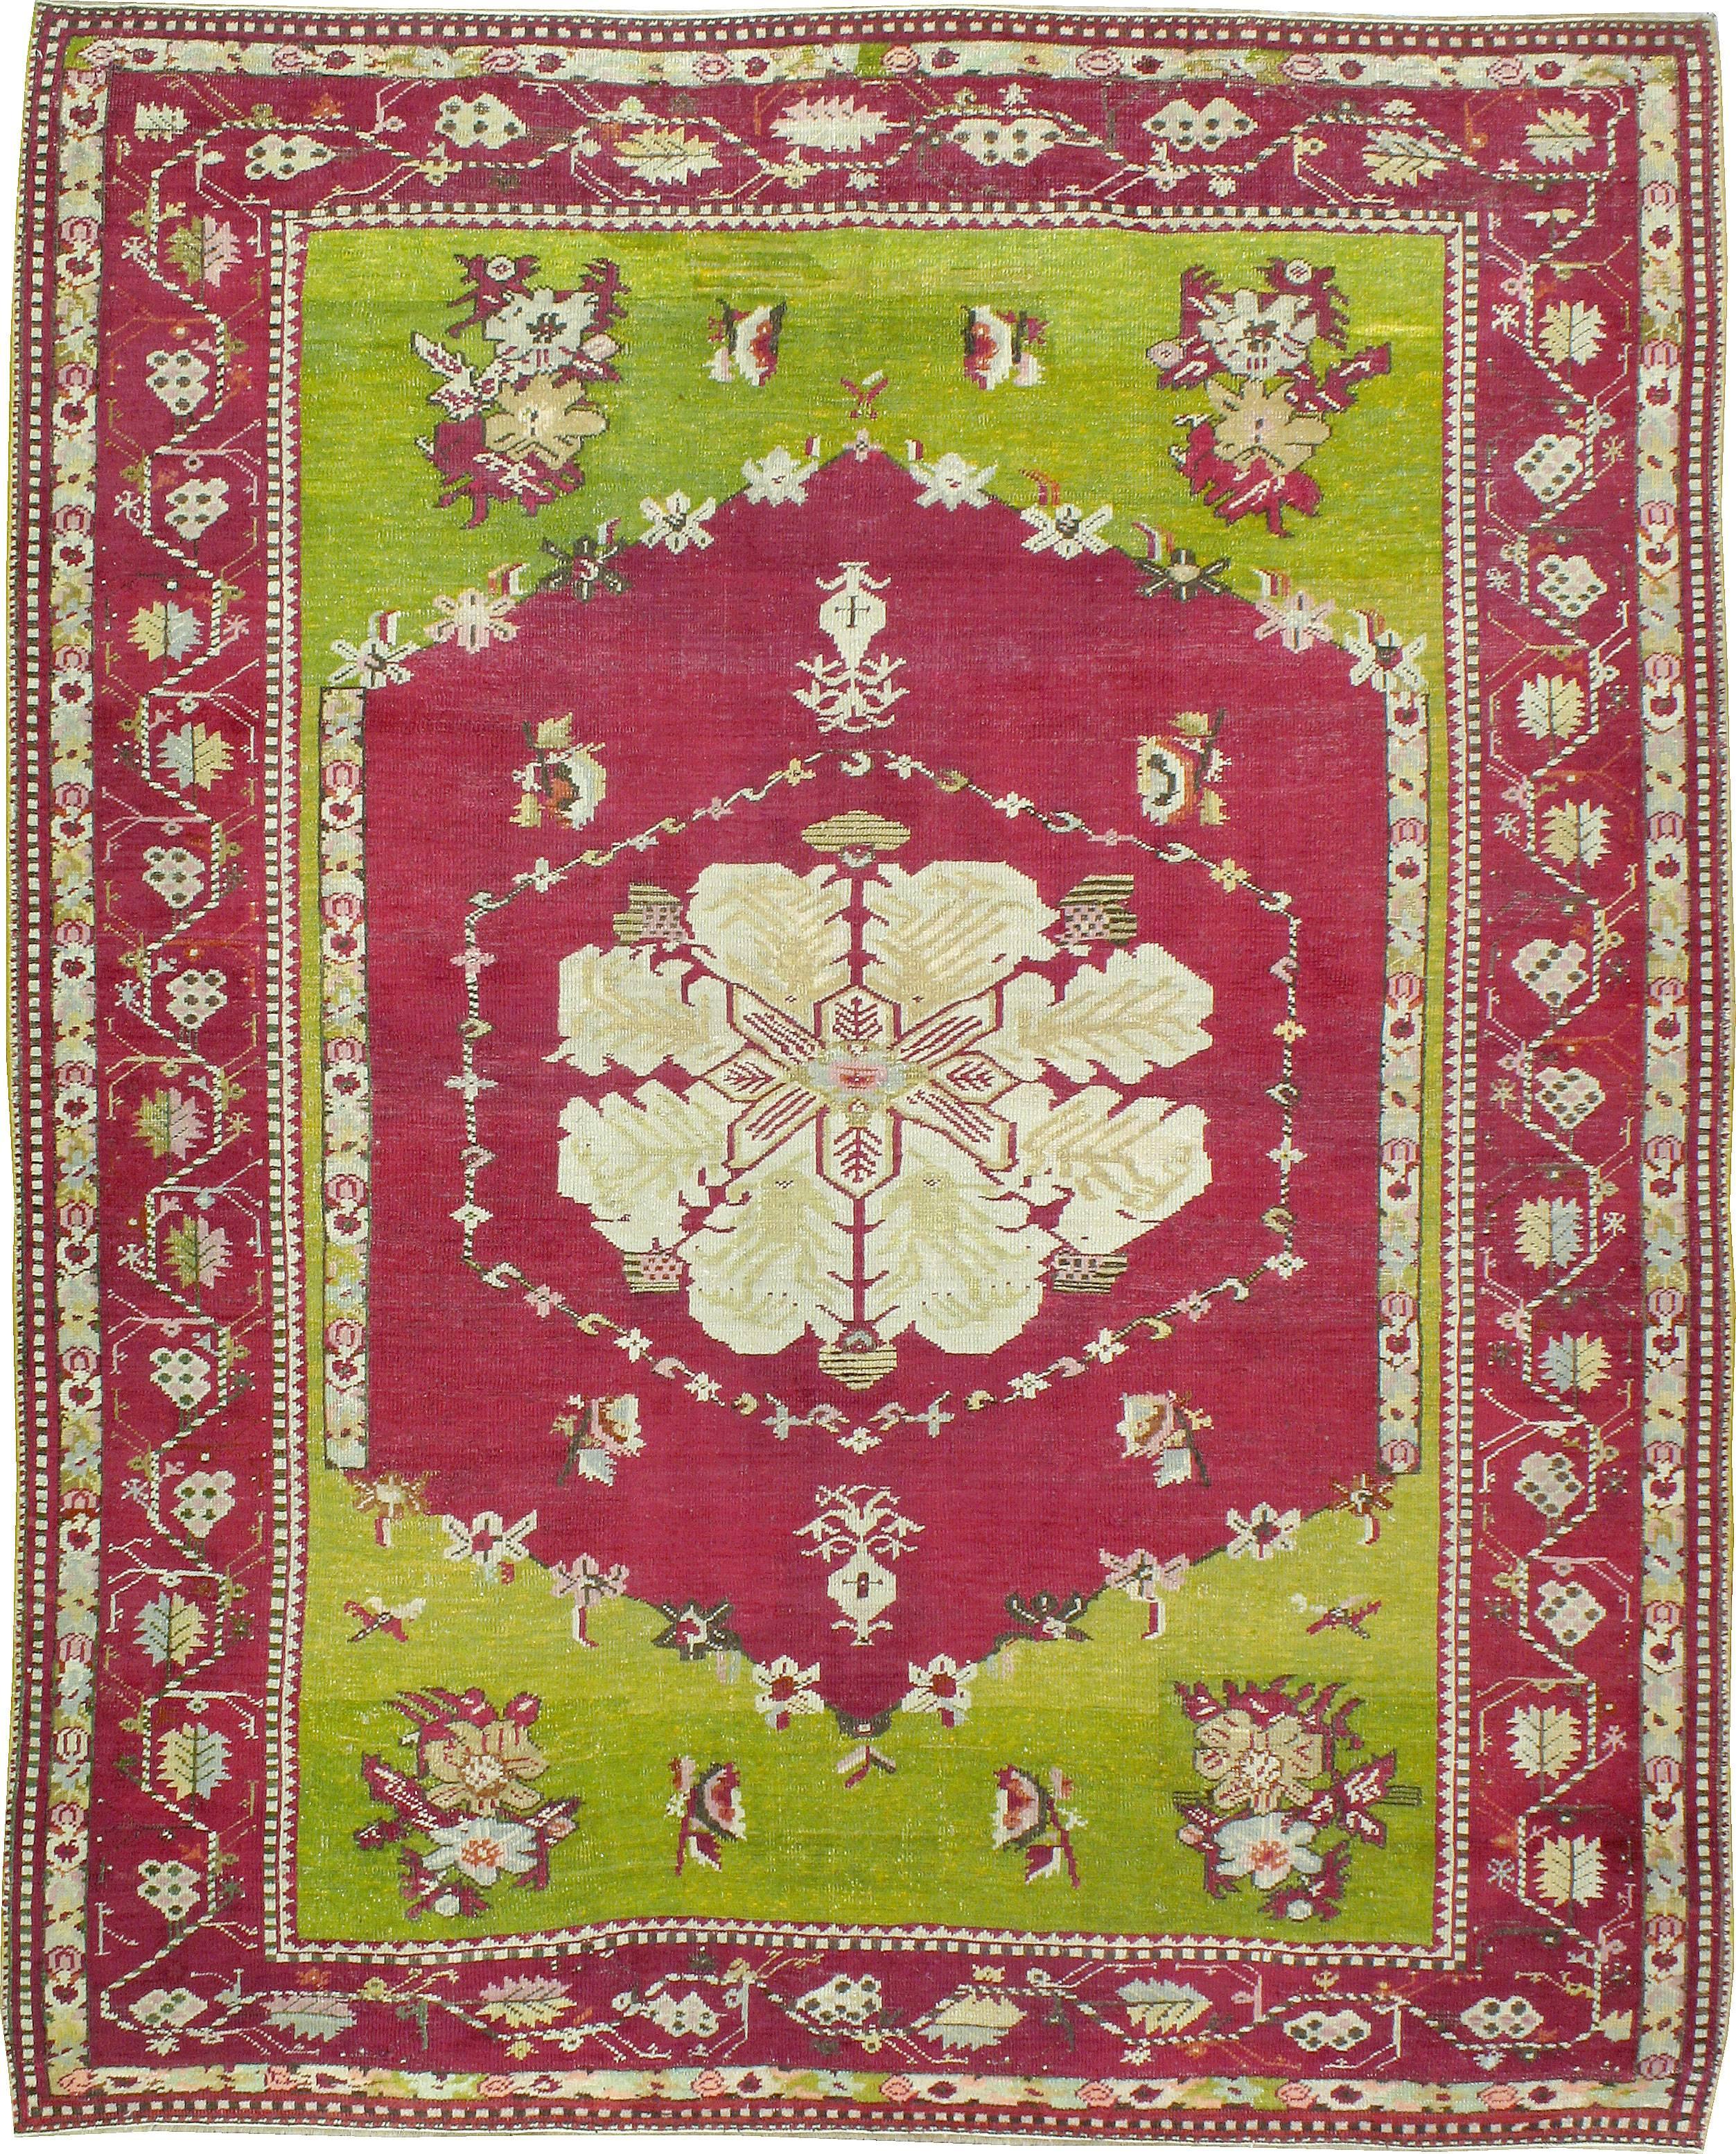 An antique Turkish Ghourdes (also spelled Ghiordes) carpet from the turn of the 20th century.